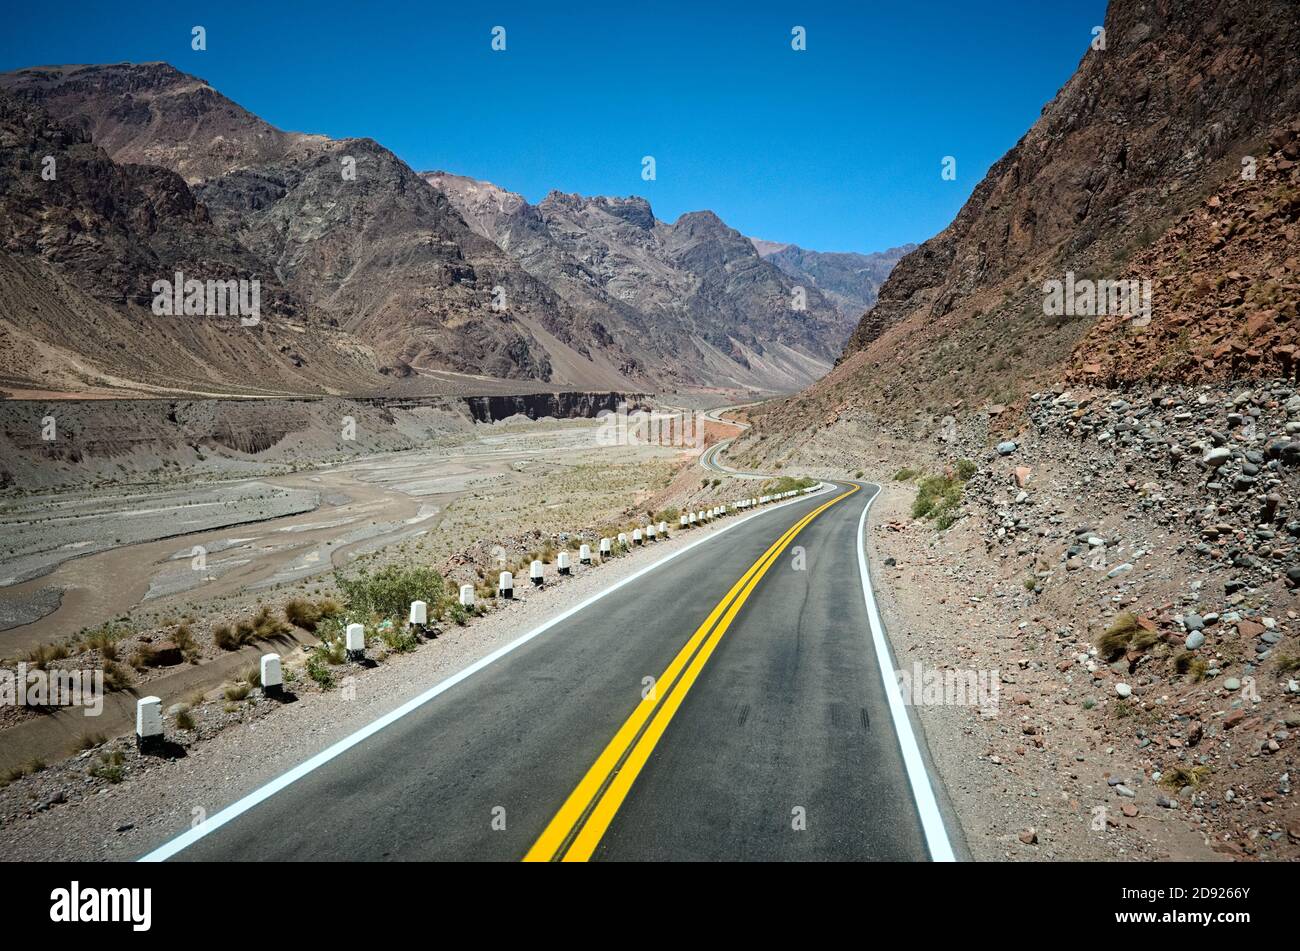 Highway road in the Andes mountains along canyon river. Empty road in arid climate as desert with rocky terrain. Curved road with yellow dividing line Stock Photo